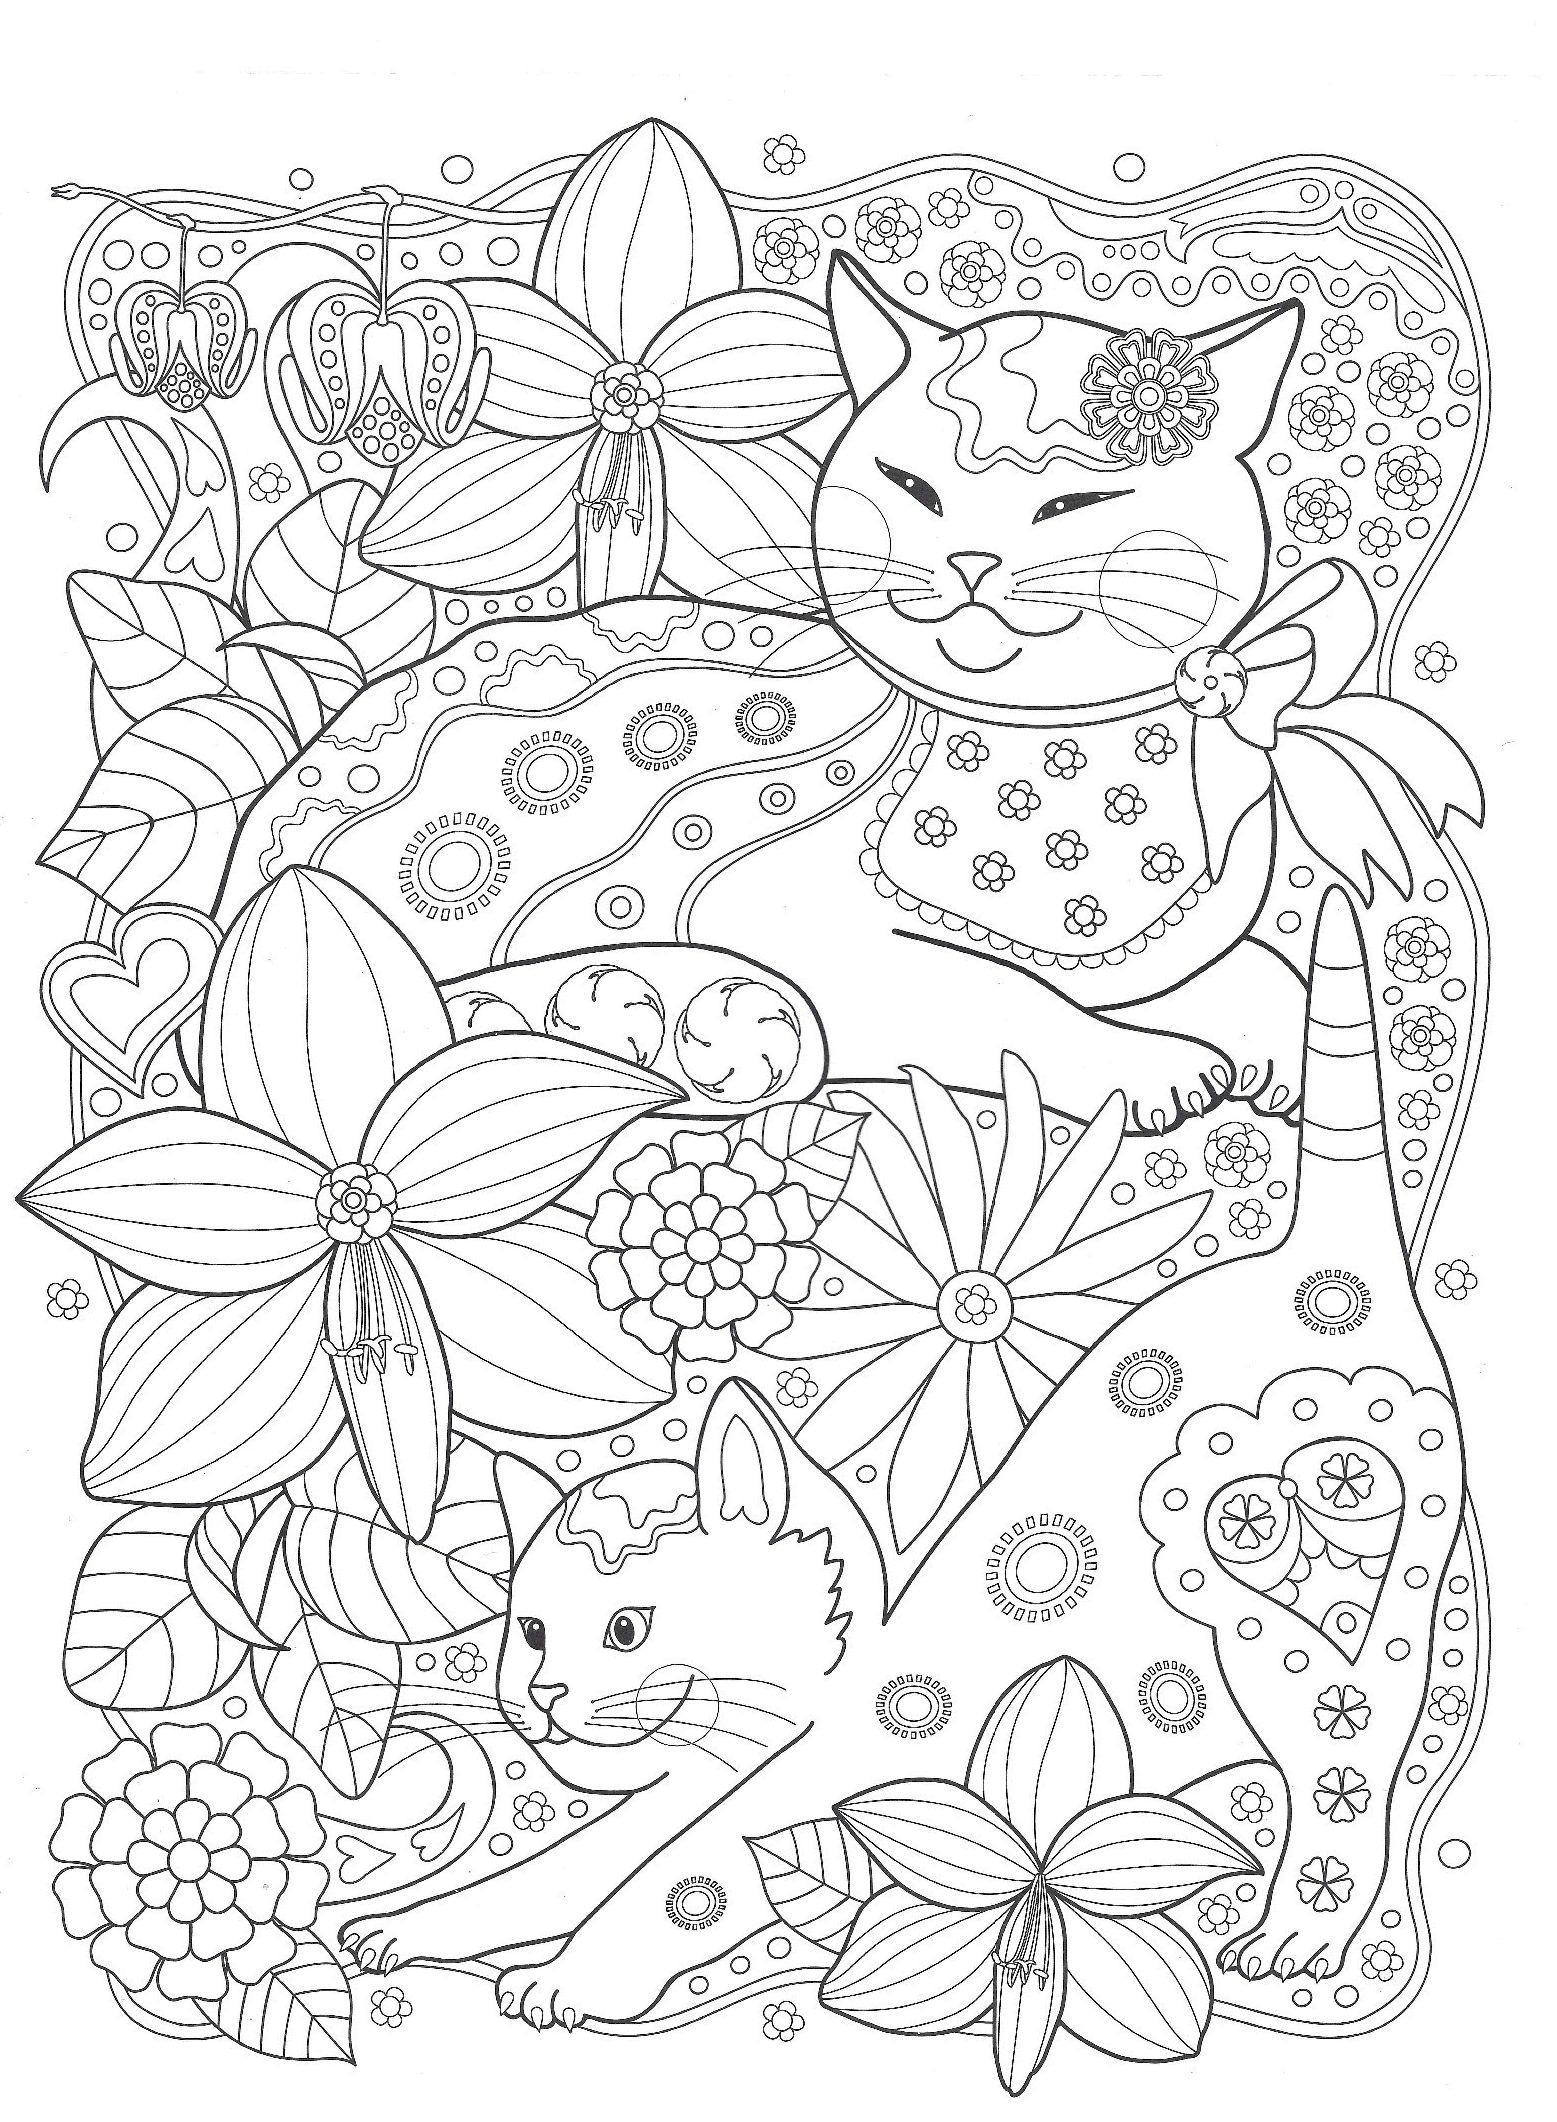 Antistress cat Coloring Pages to download and print for free